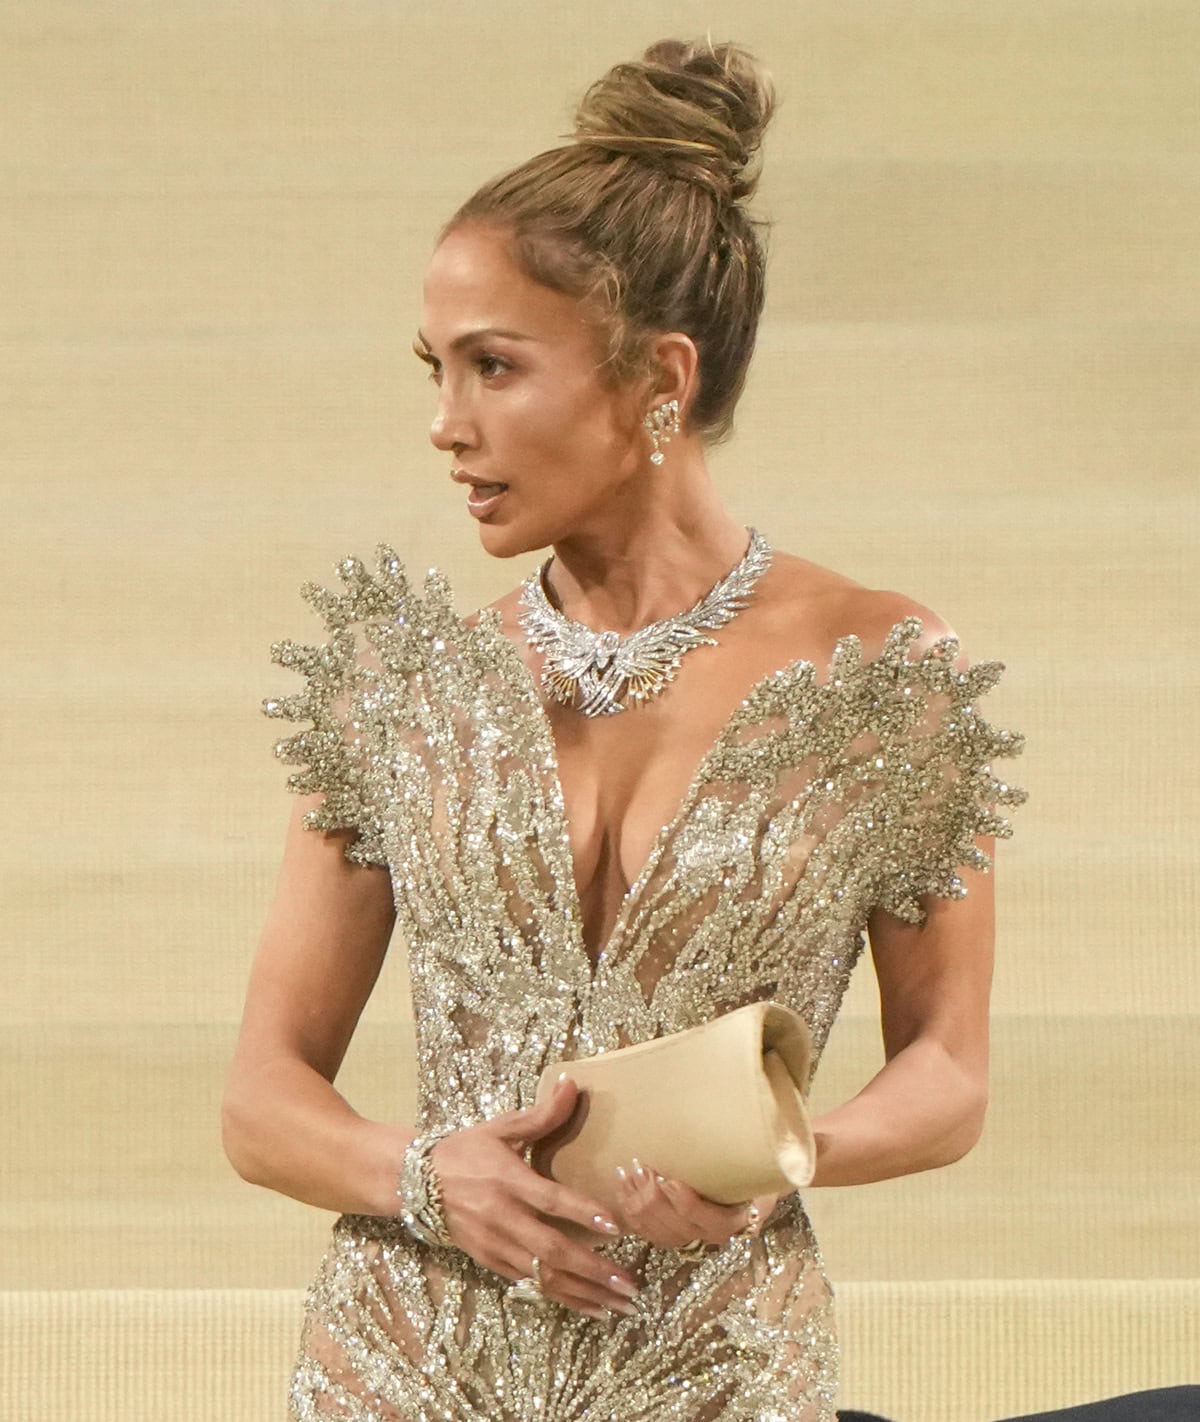 Jennifer Lopez gives her glittering gown some extra sparkles with exquisite jewelry from Tiffany & Co.'s newly launched Blue Book Tiffany Celeste collection